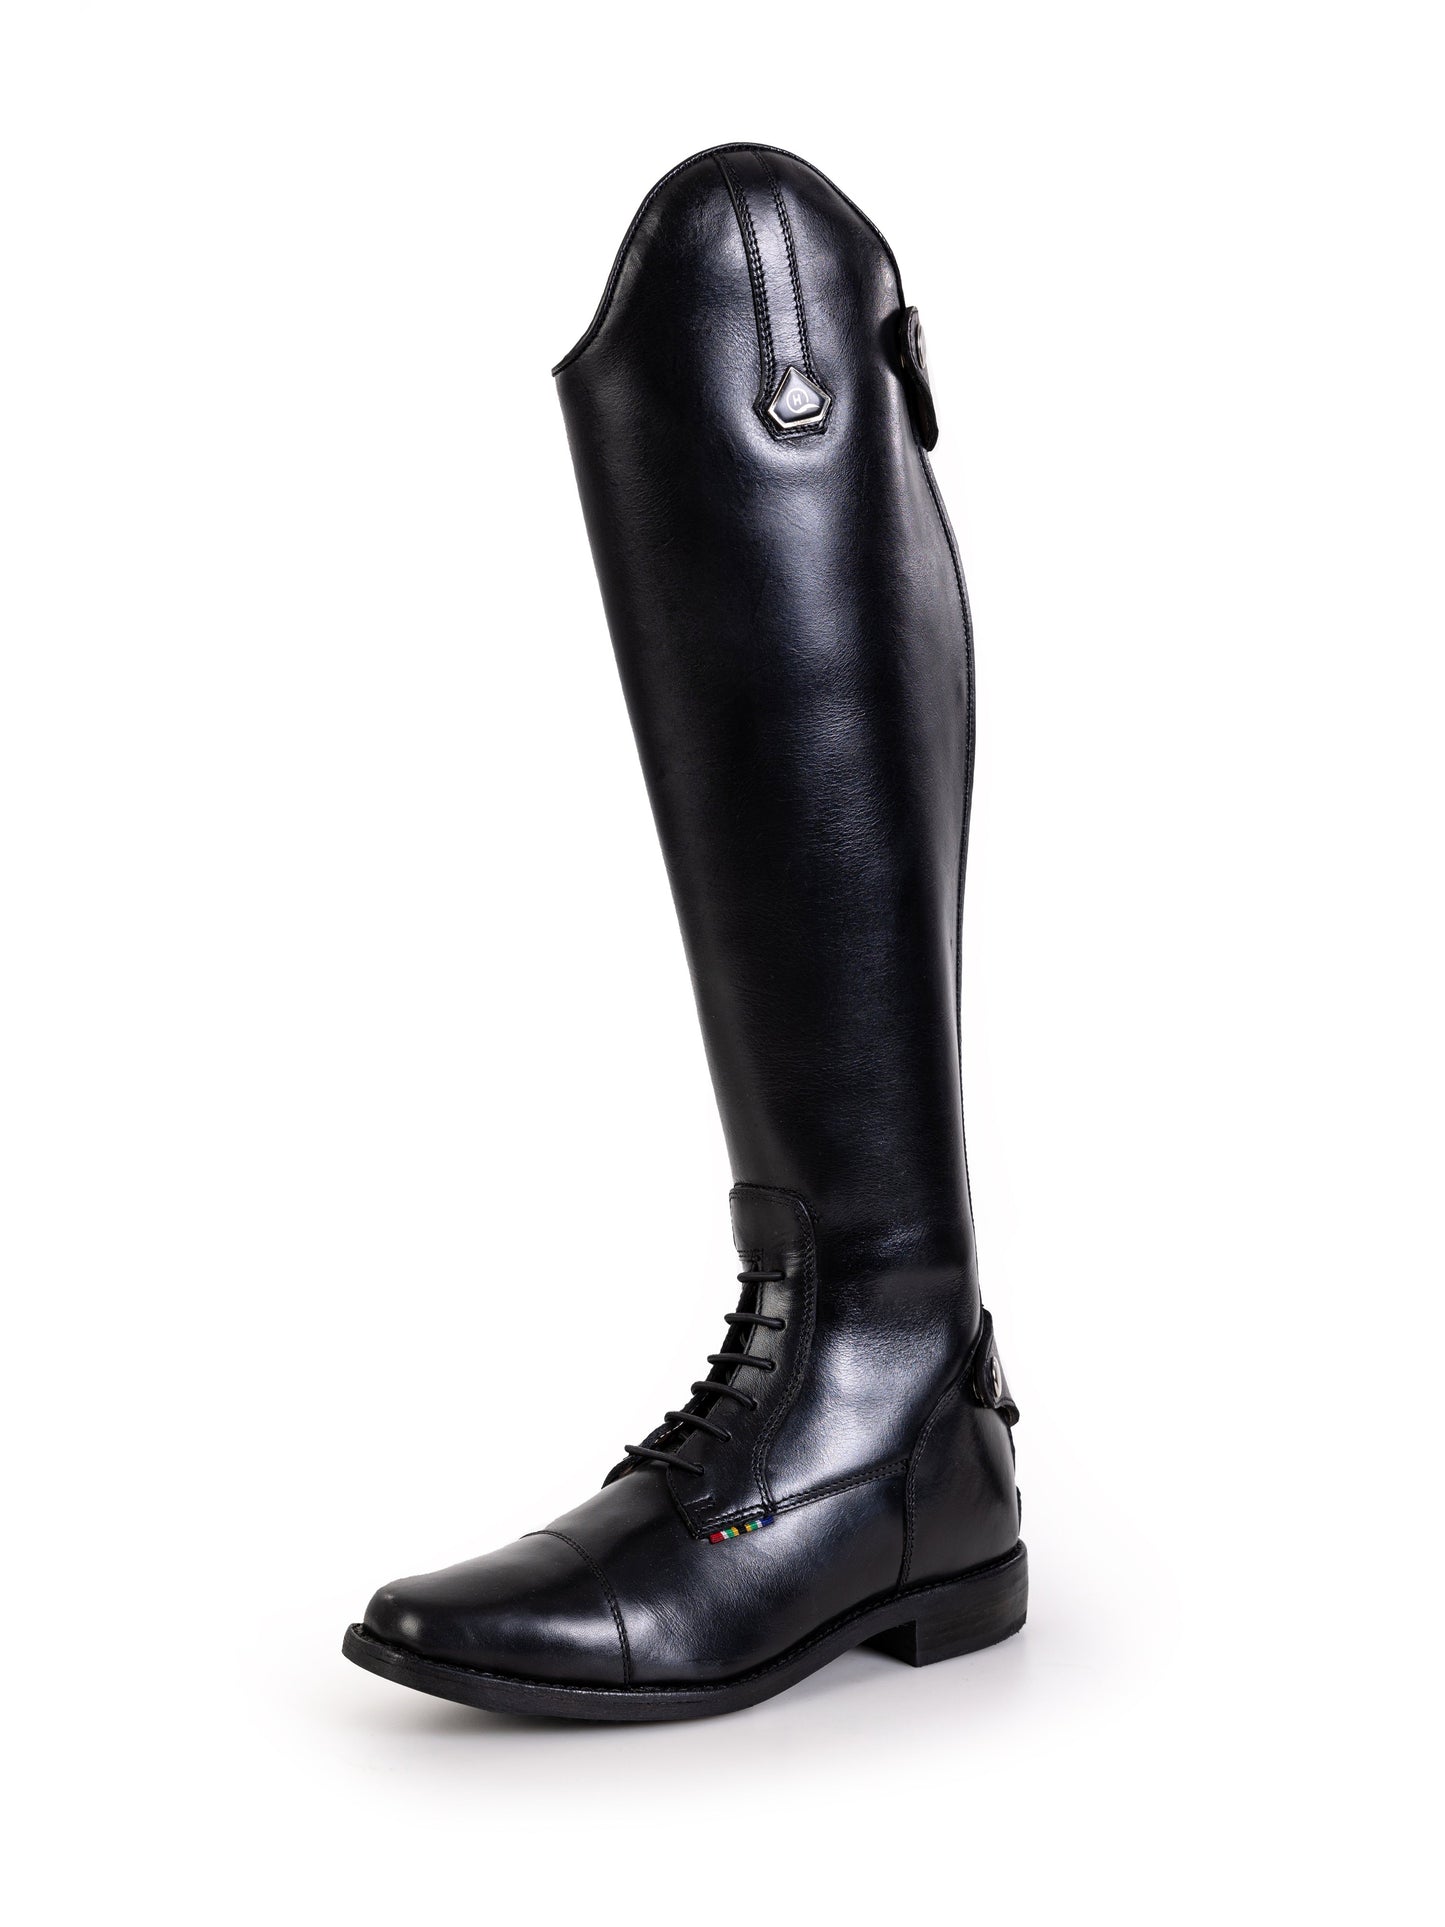 Long Black Horse Riding Boots | Hello Quality Equestrian